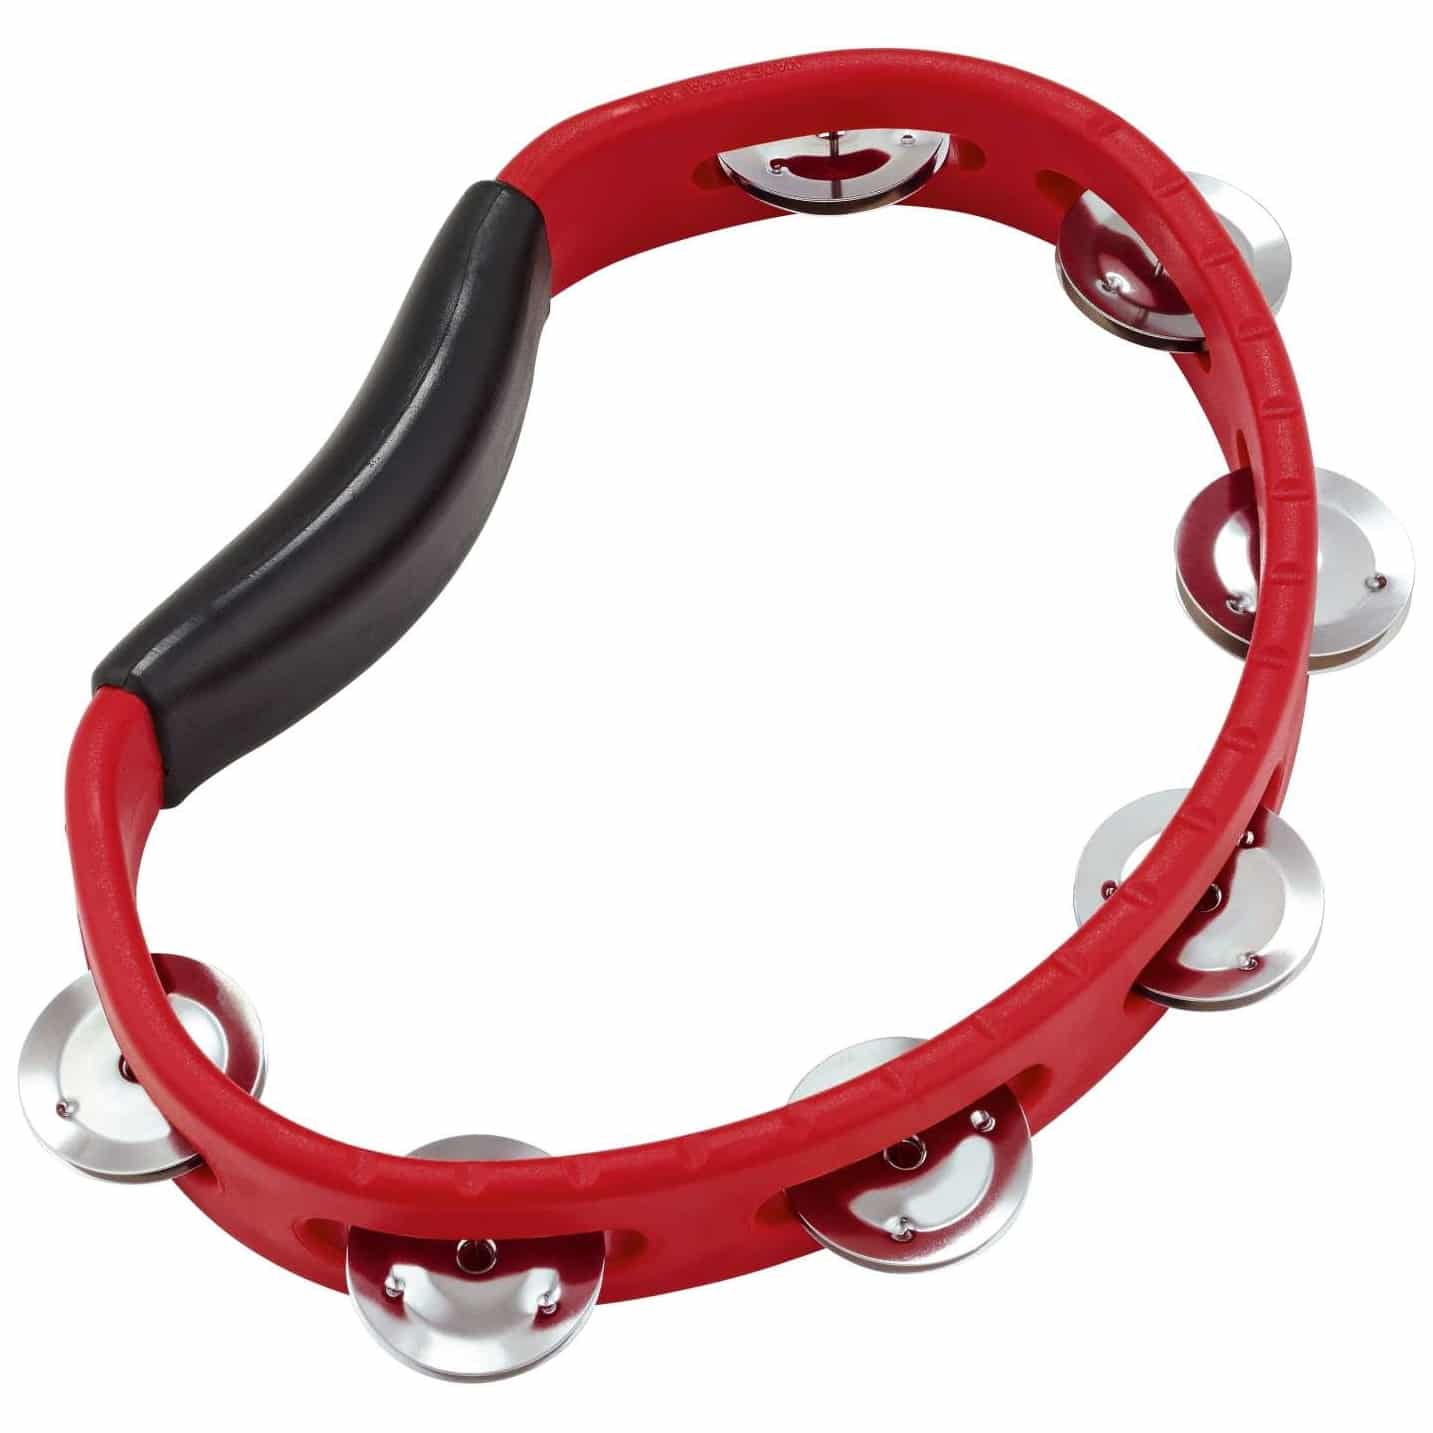 Meinl Percussion HTR - Headliner Series Hand Held ABS Tambourine,  Red, Stainless Steel Jingles 